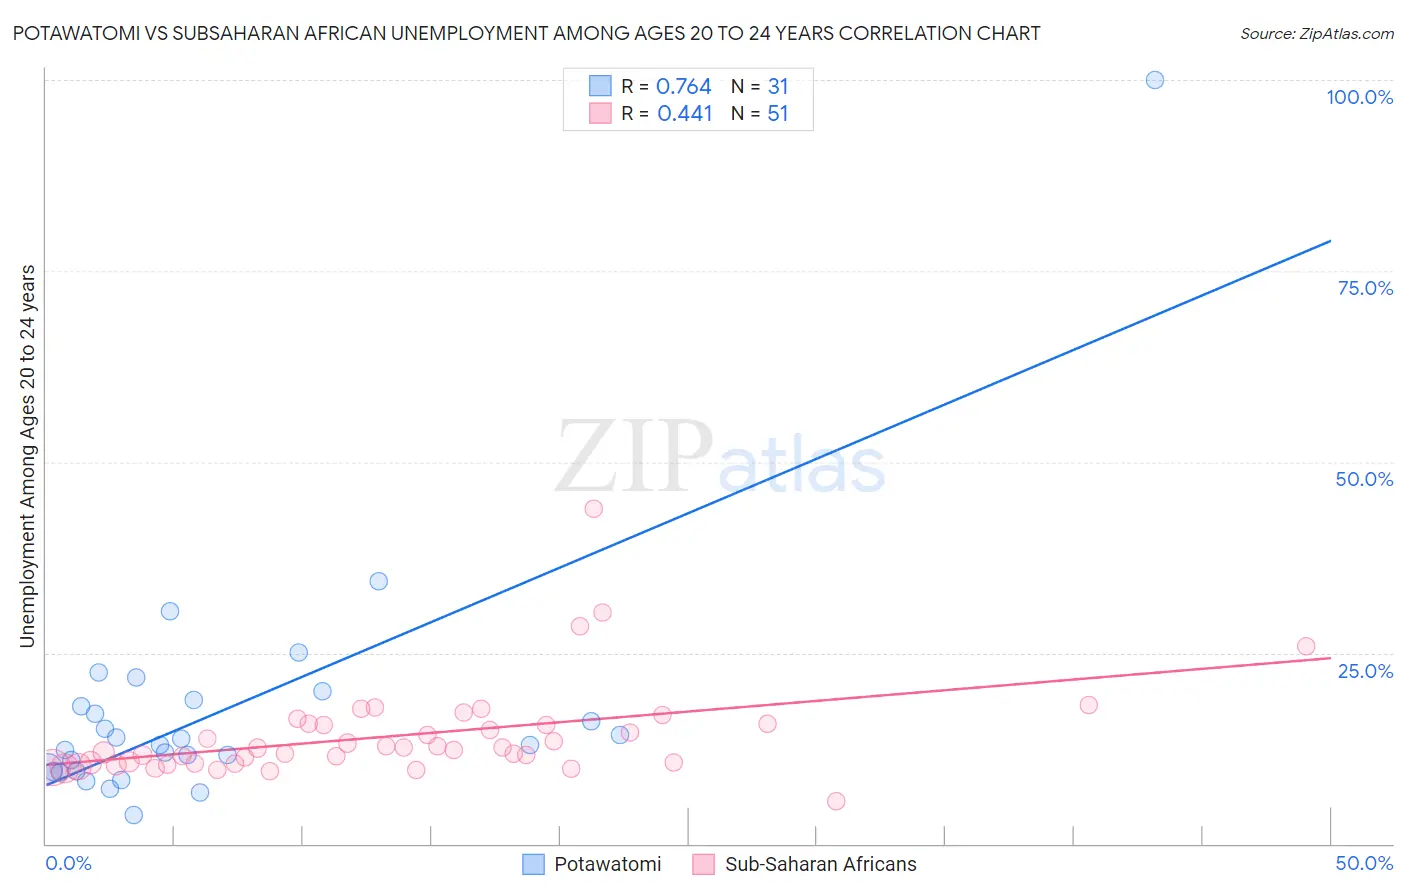 Potawatomi vs Subsaharan African Unemployment Among Ages 20 to 24 years